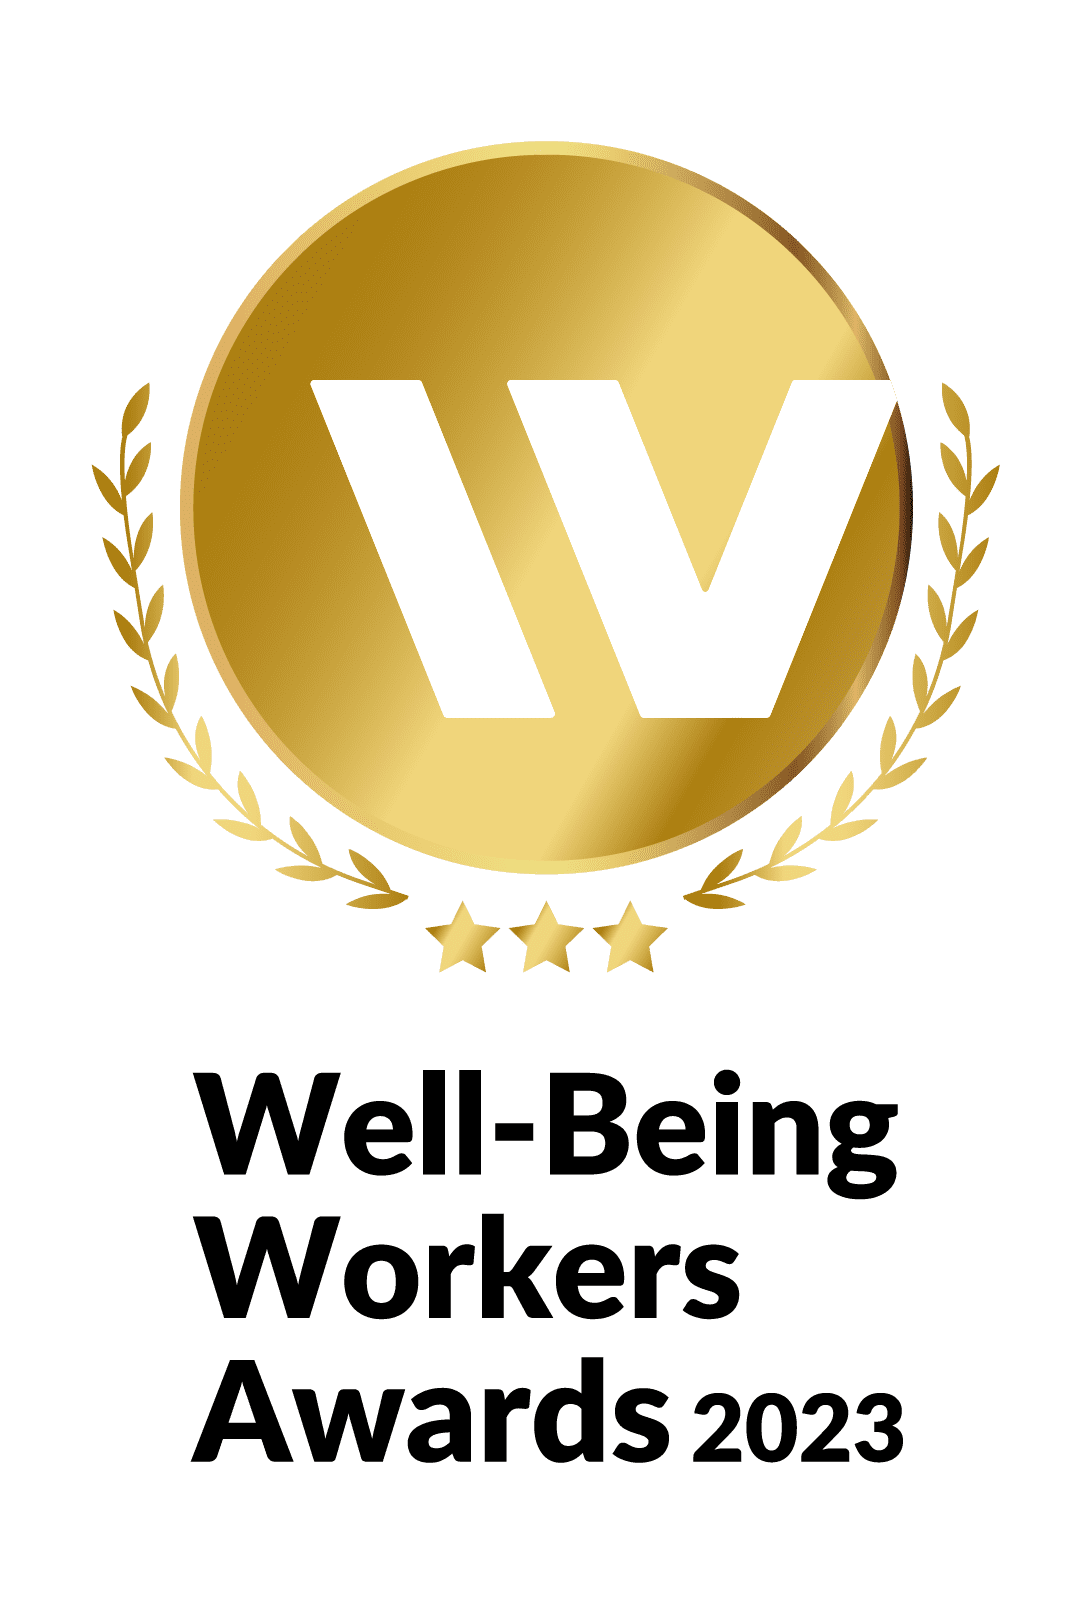 Well-Being Workers Awards 2023